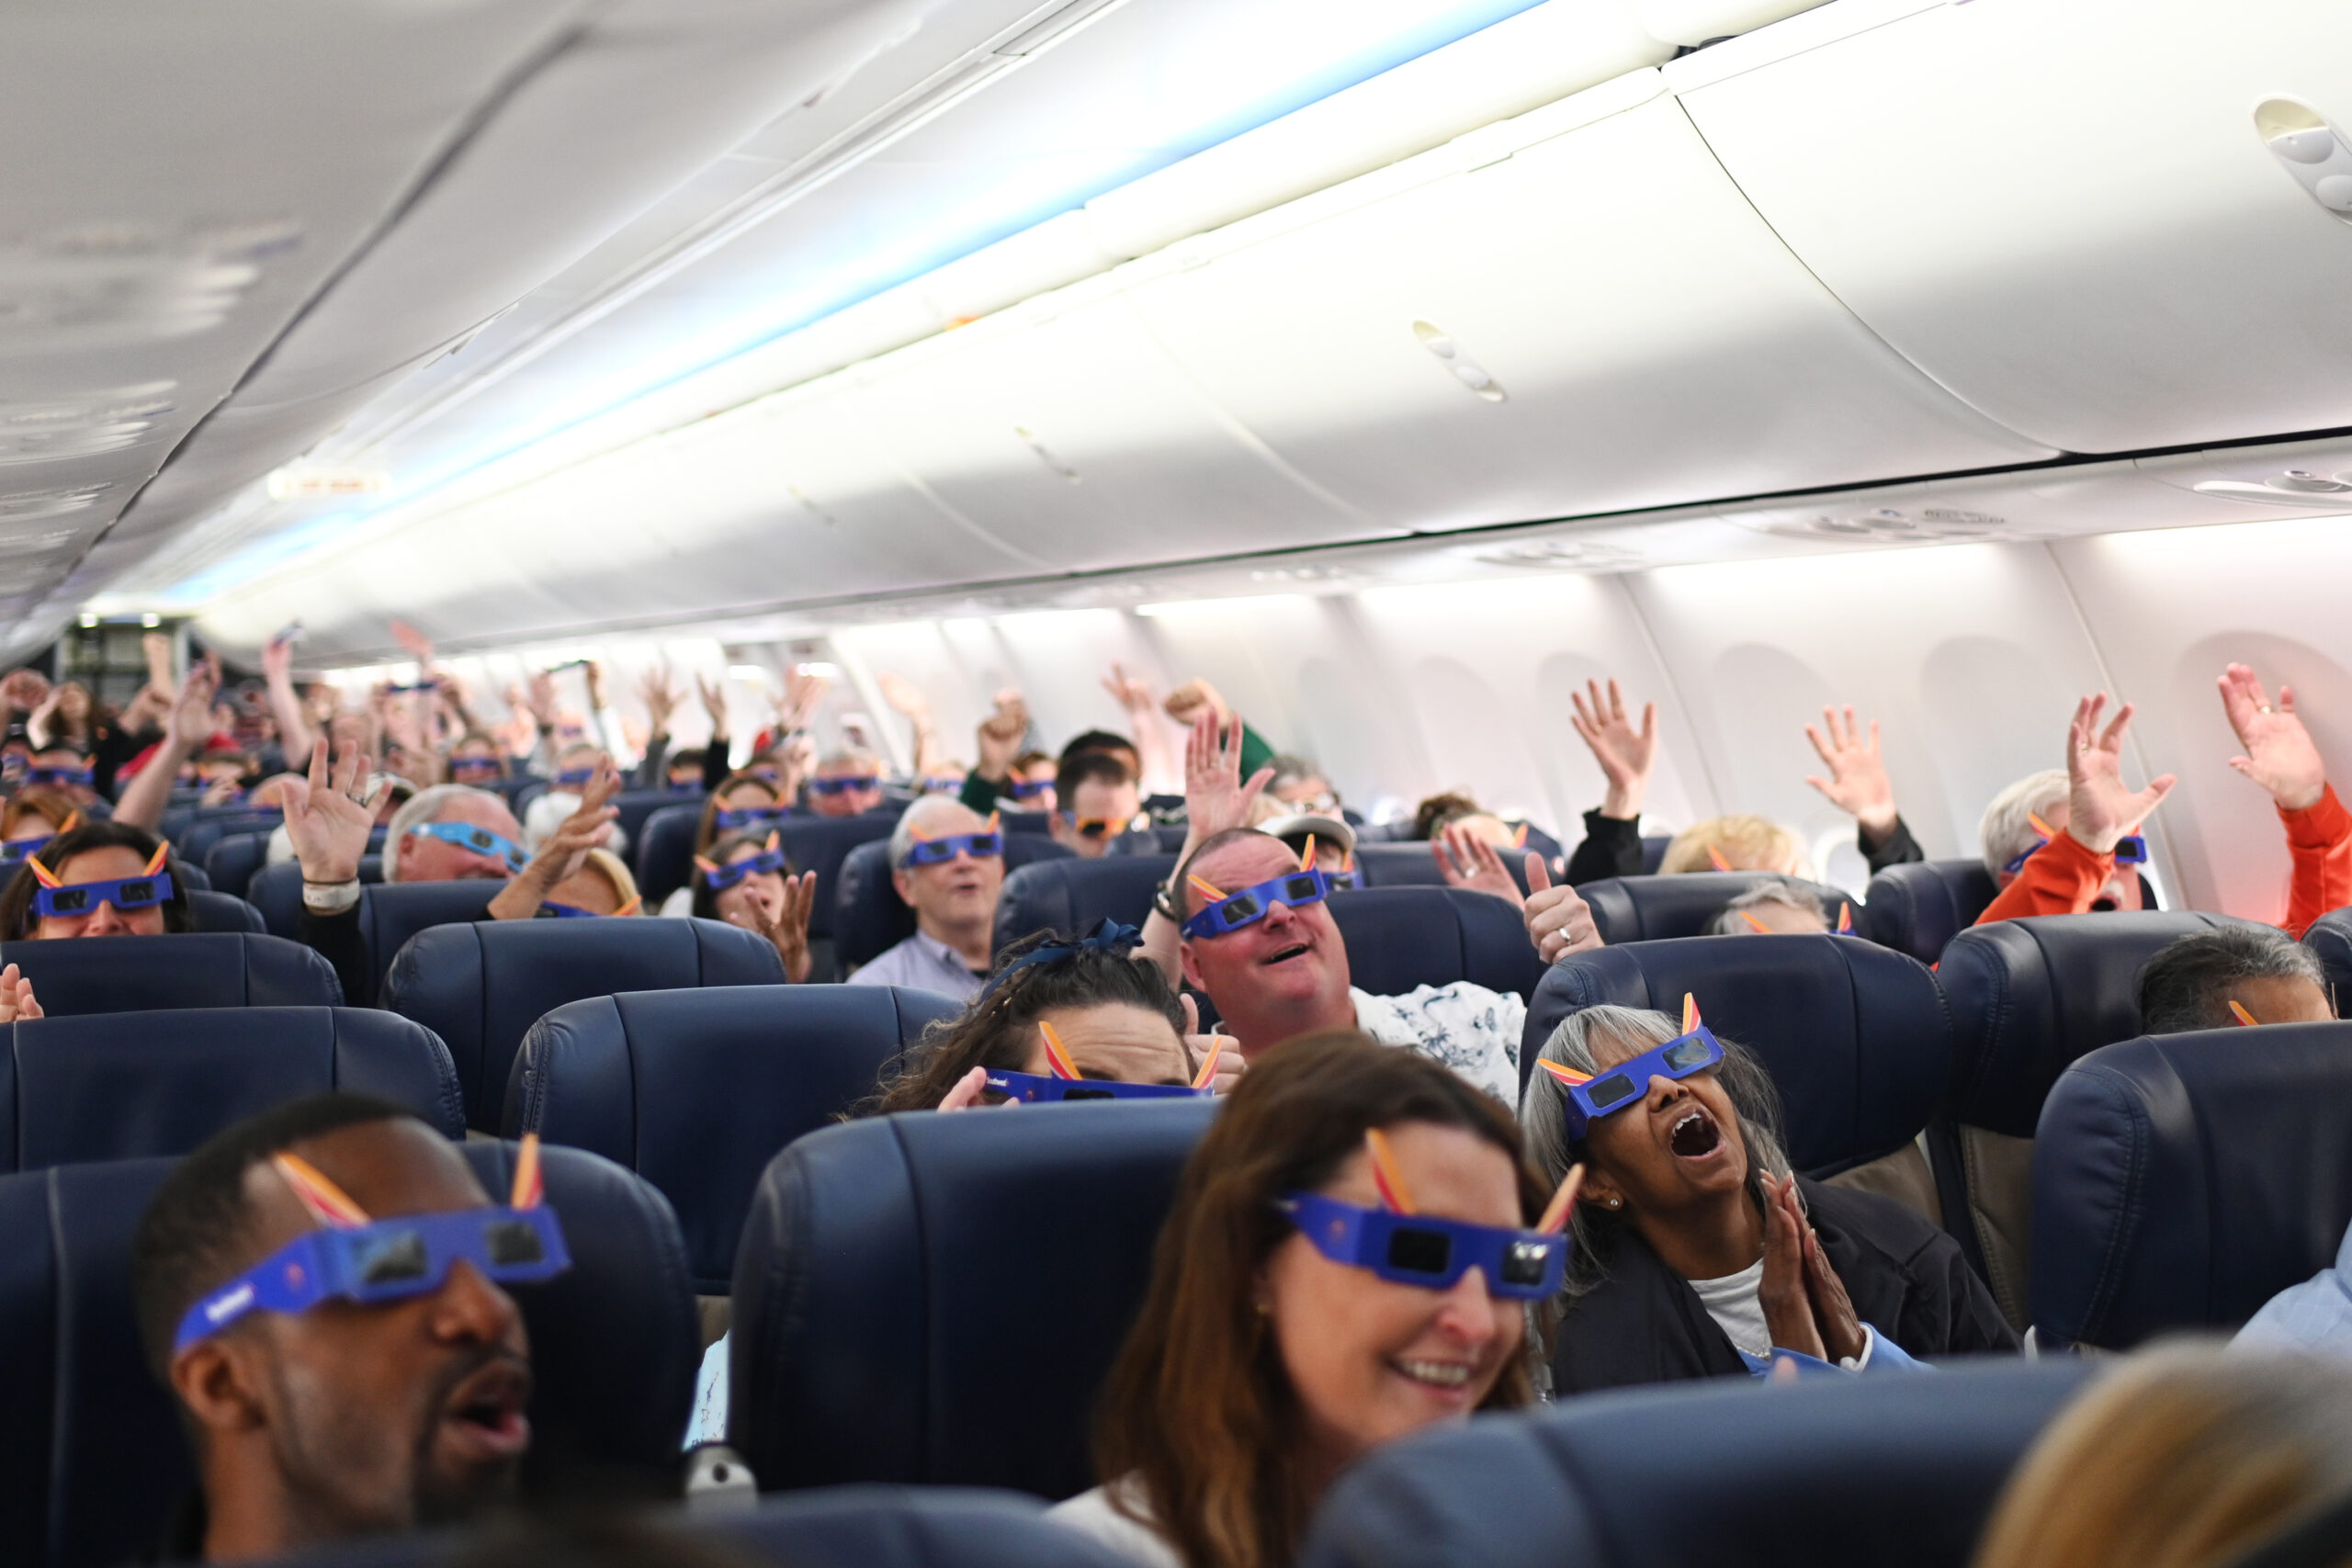 passengers cheer on a plane, wearing eclipse sunglasses